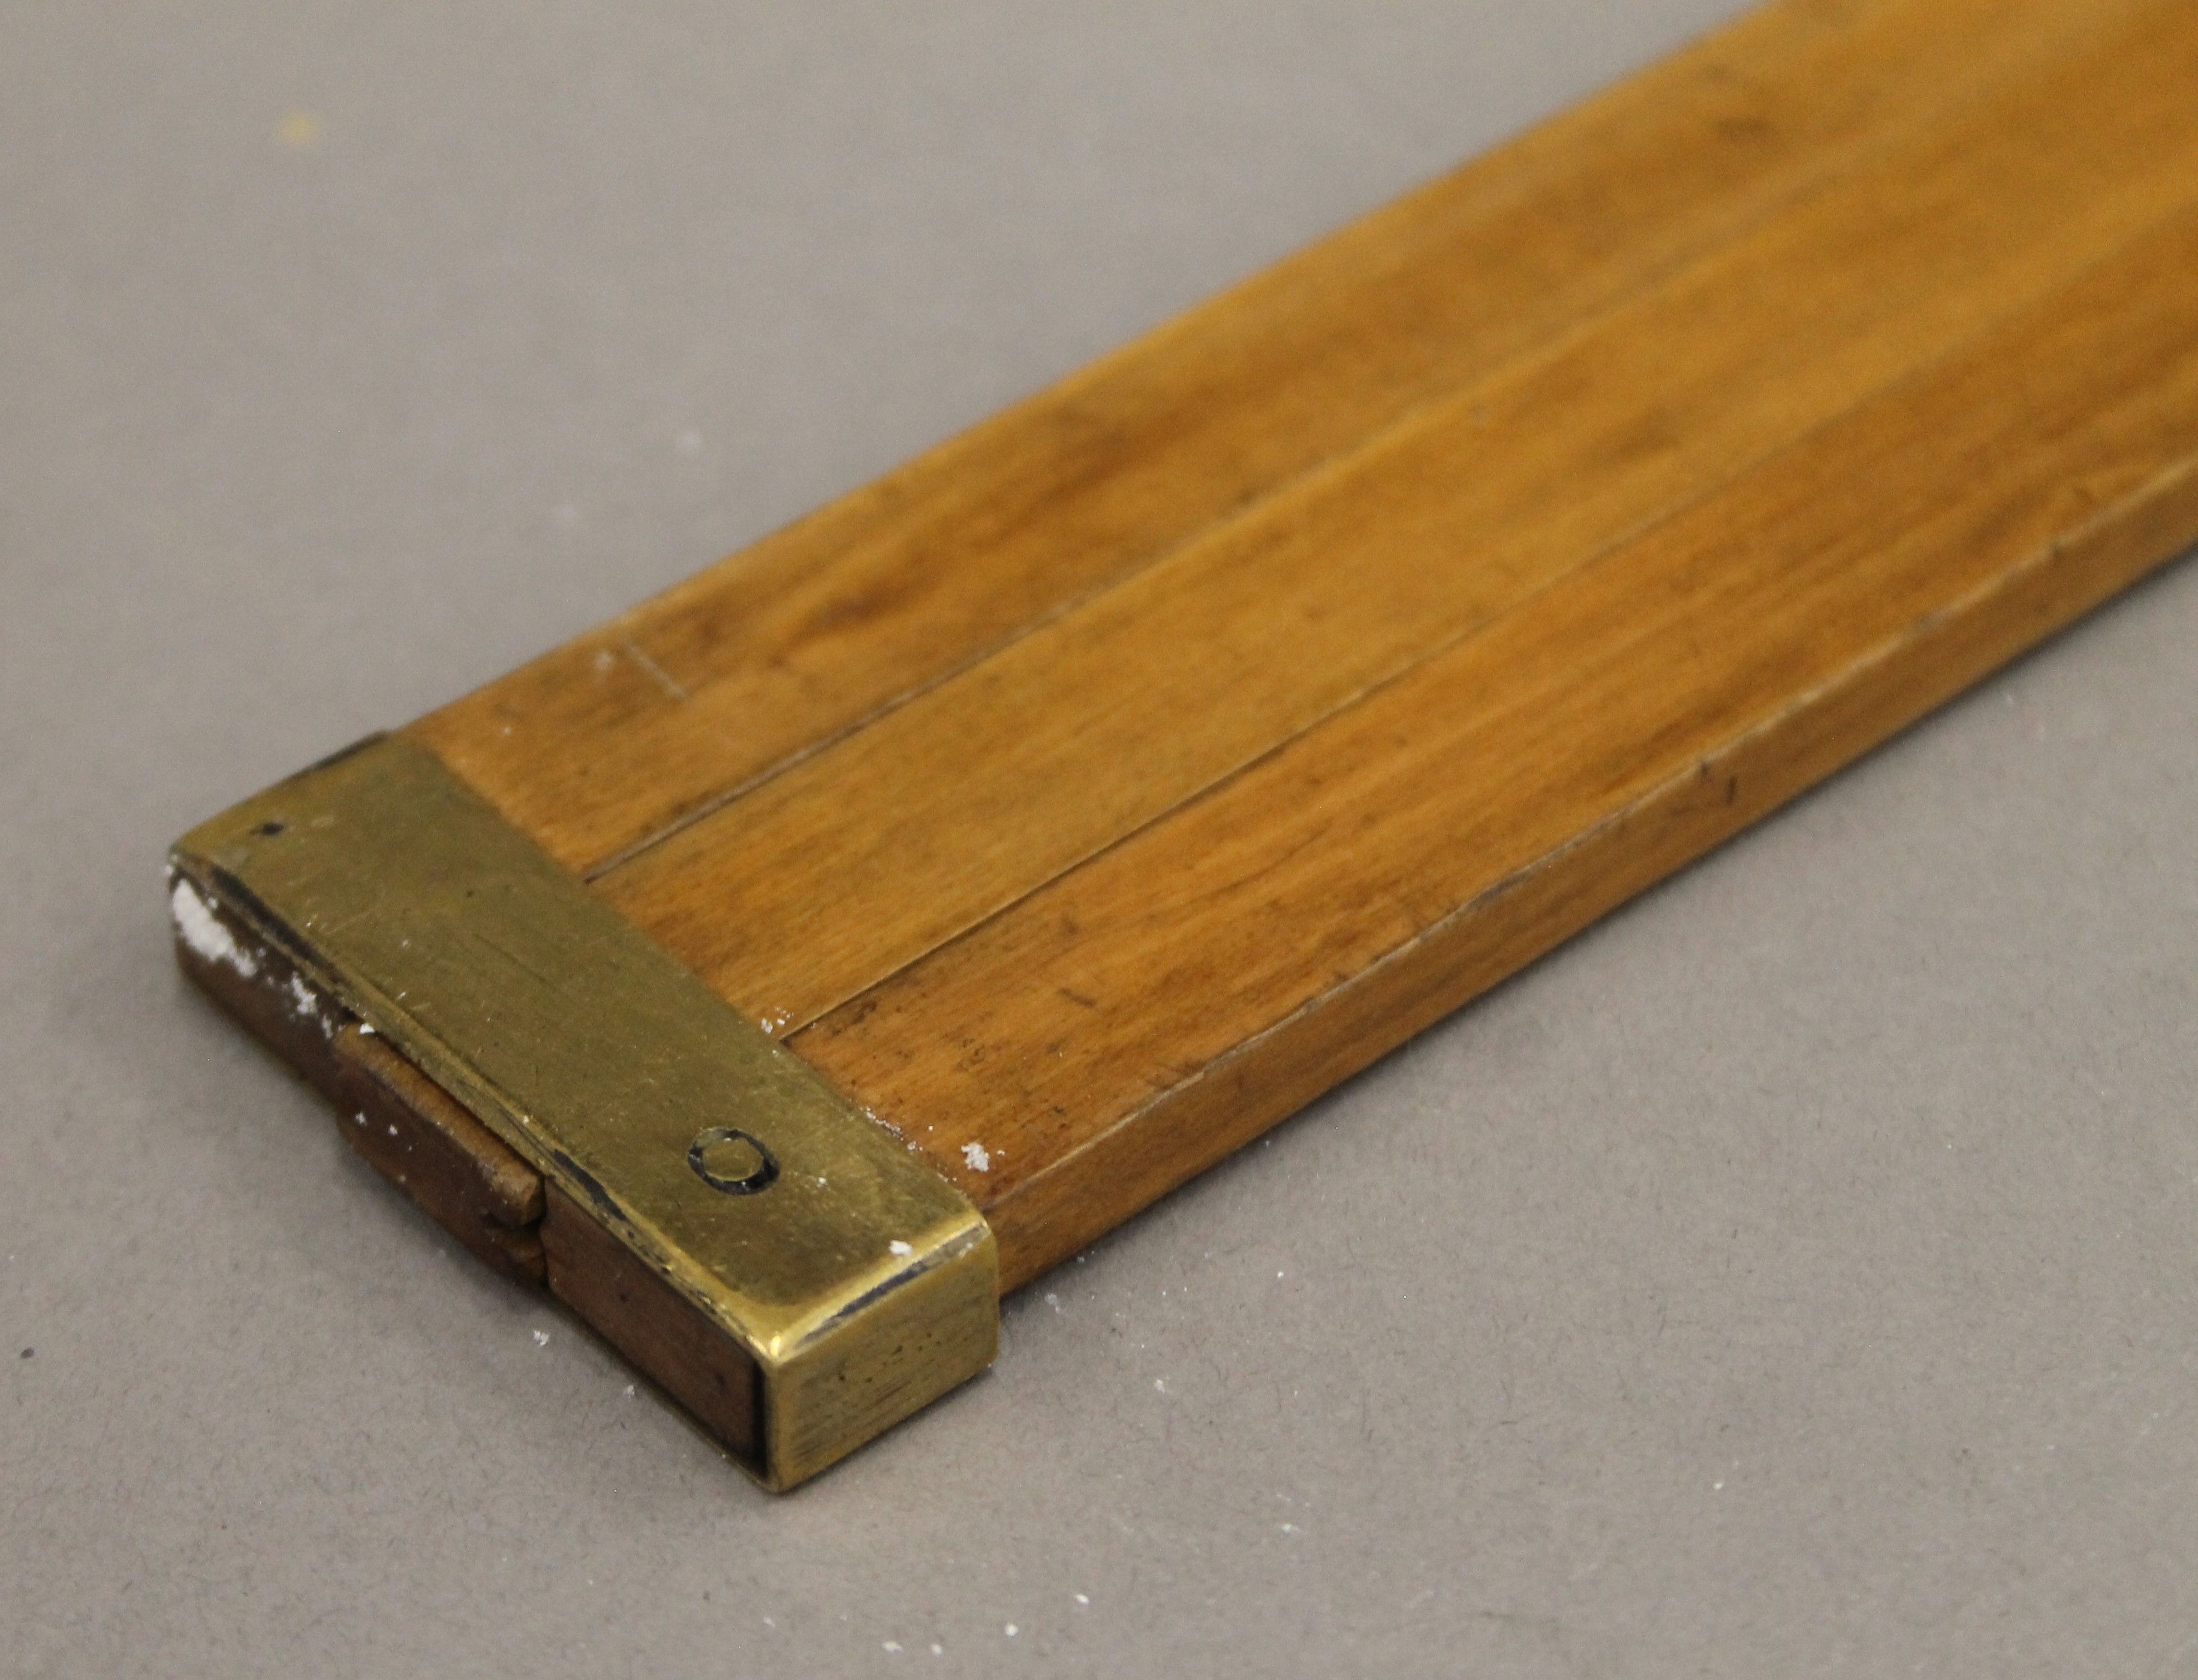 Two Victorian brass mounted boxwood slide rules, one marked Dring & Fage Makers, 56 Stamford St, - Image 9 of 9